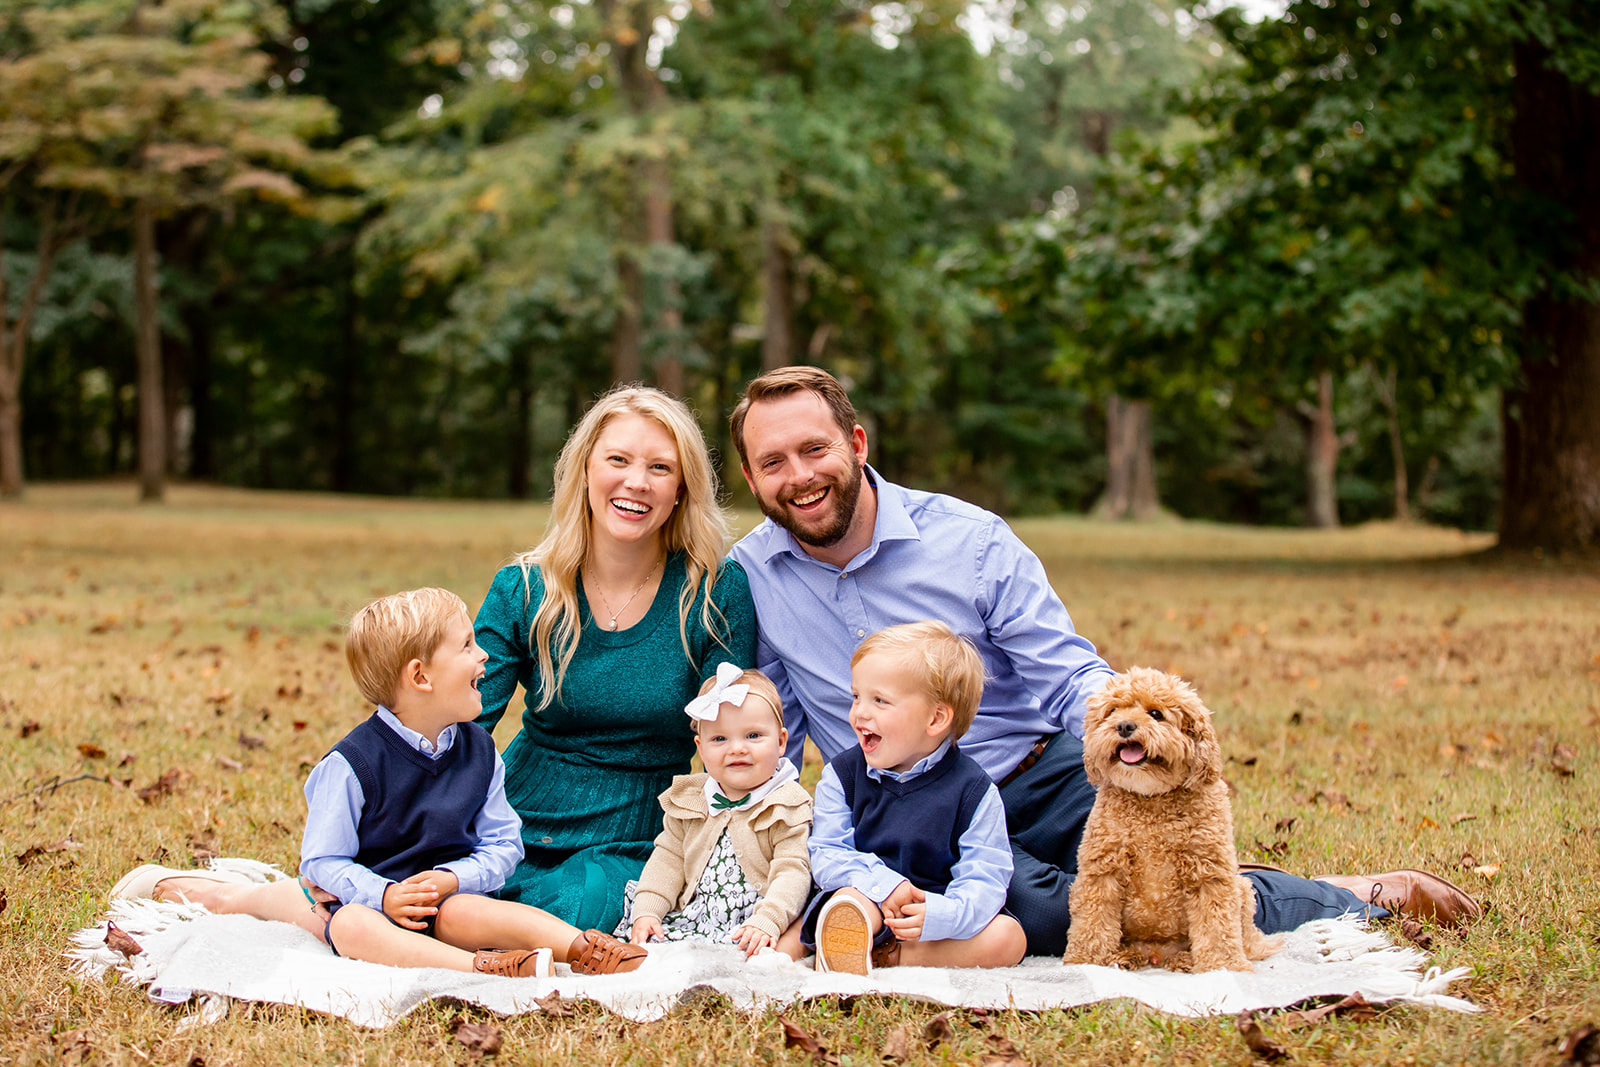 5 Family Photo Mistakes You Didnt Know You Were Making - Image Property of www.j-dphoto.com